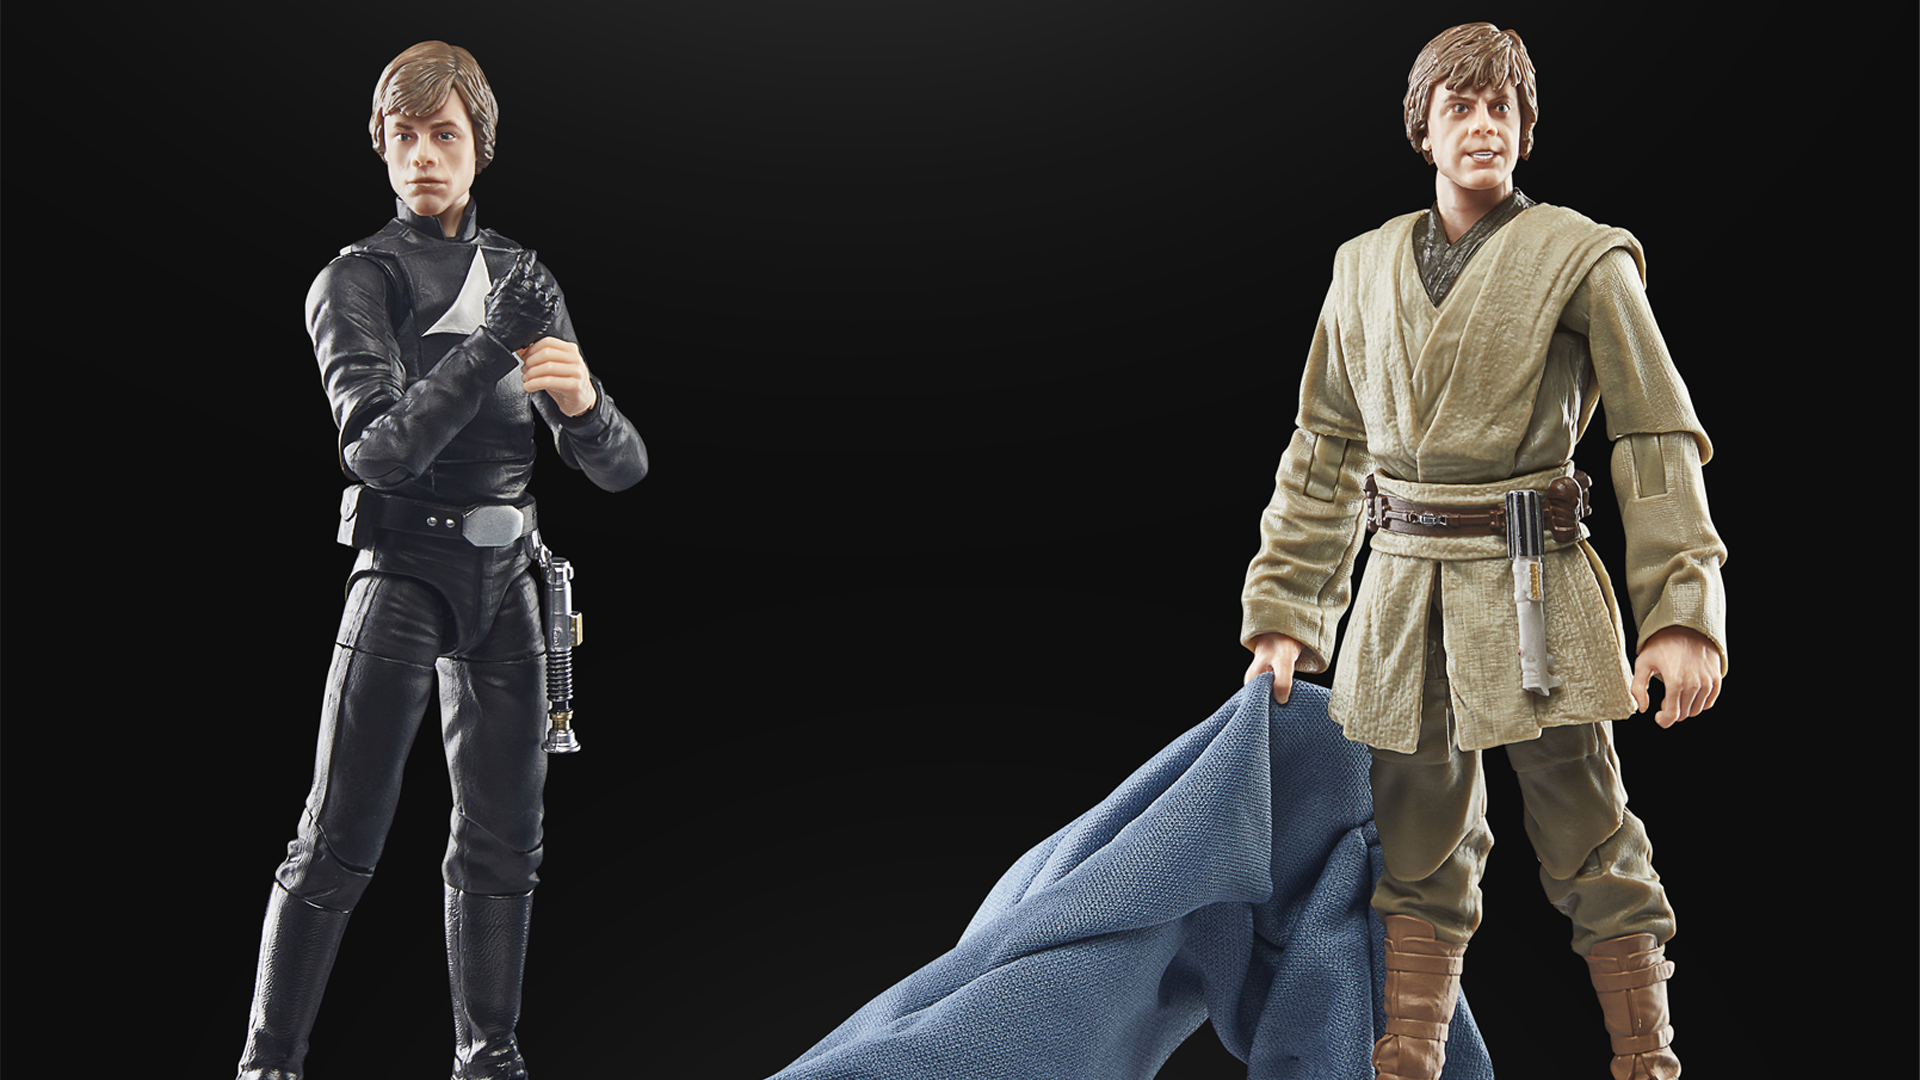 Hasbro Reveals New Figures Including ‘The Last Command’ Four-Pack With Luuke